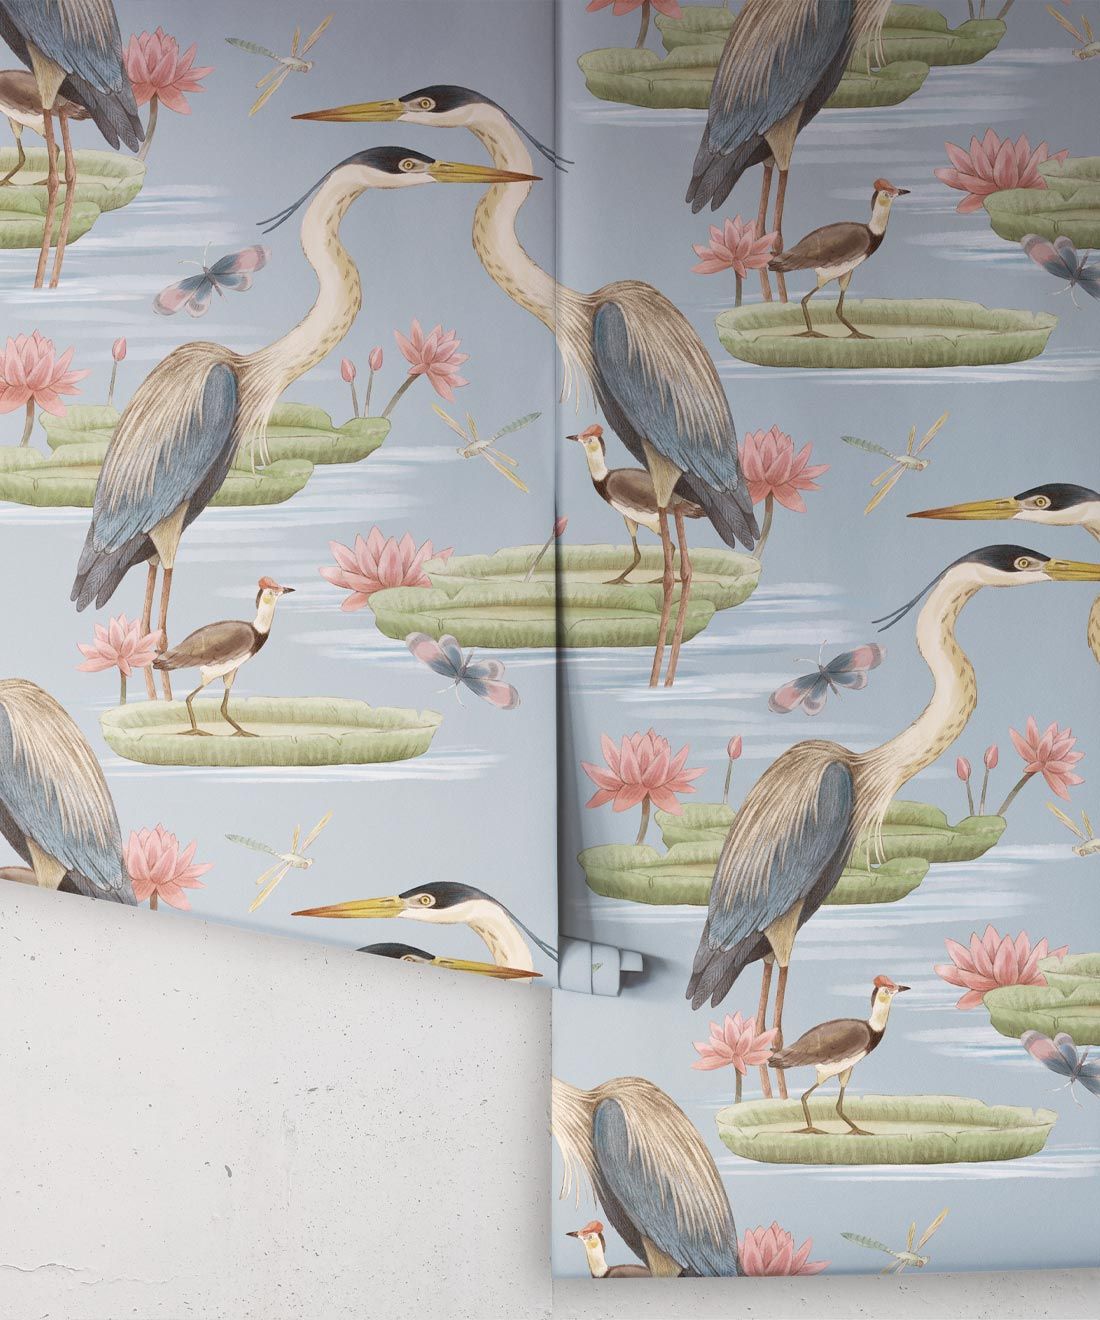 Heron Jacana Giant Lillypad Wallpaper • Muted Blue • Rolls